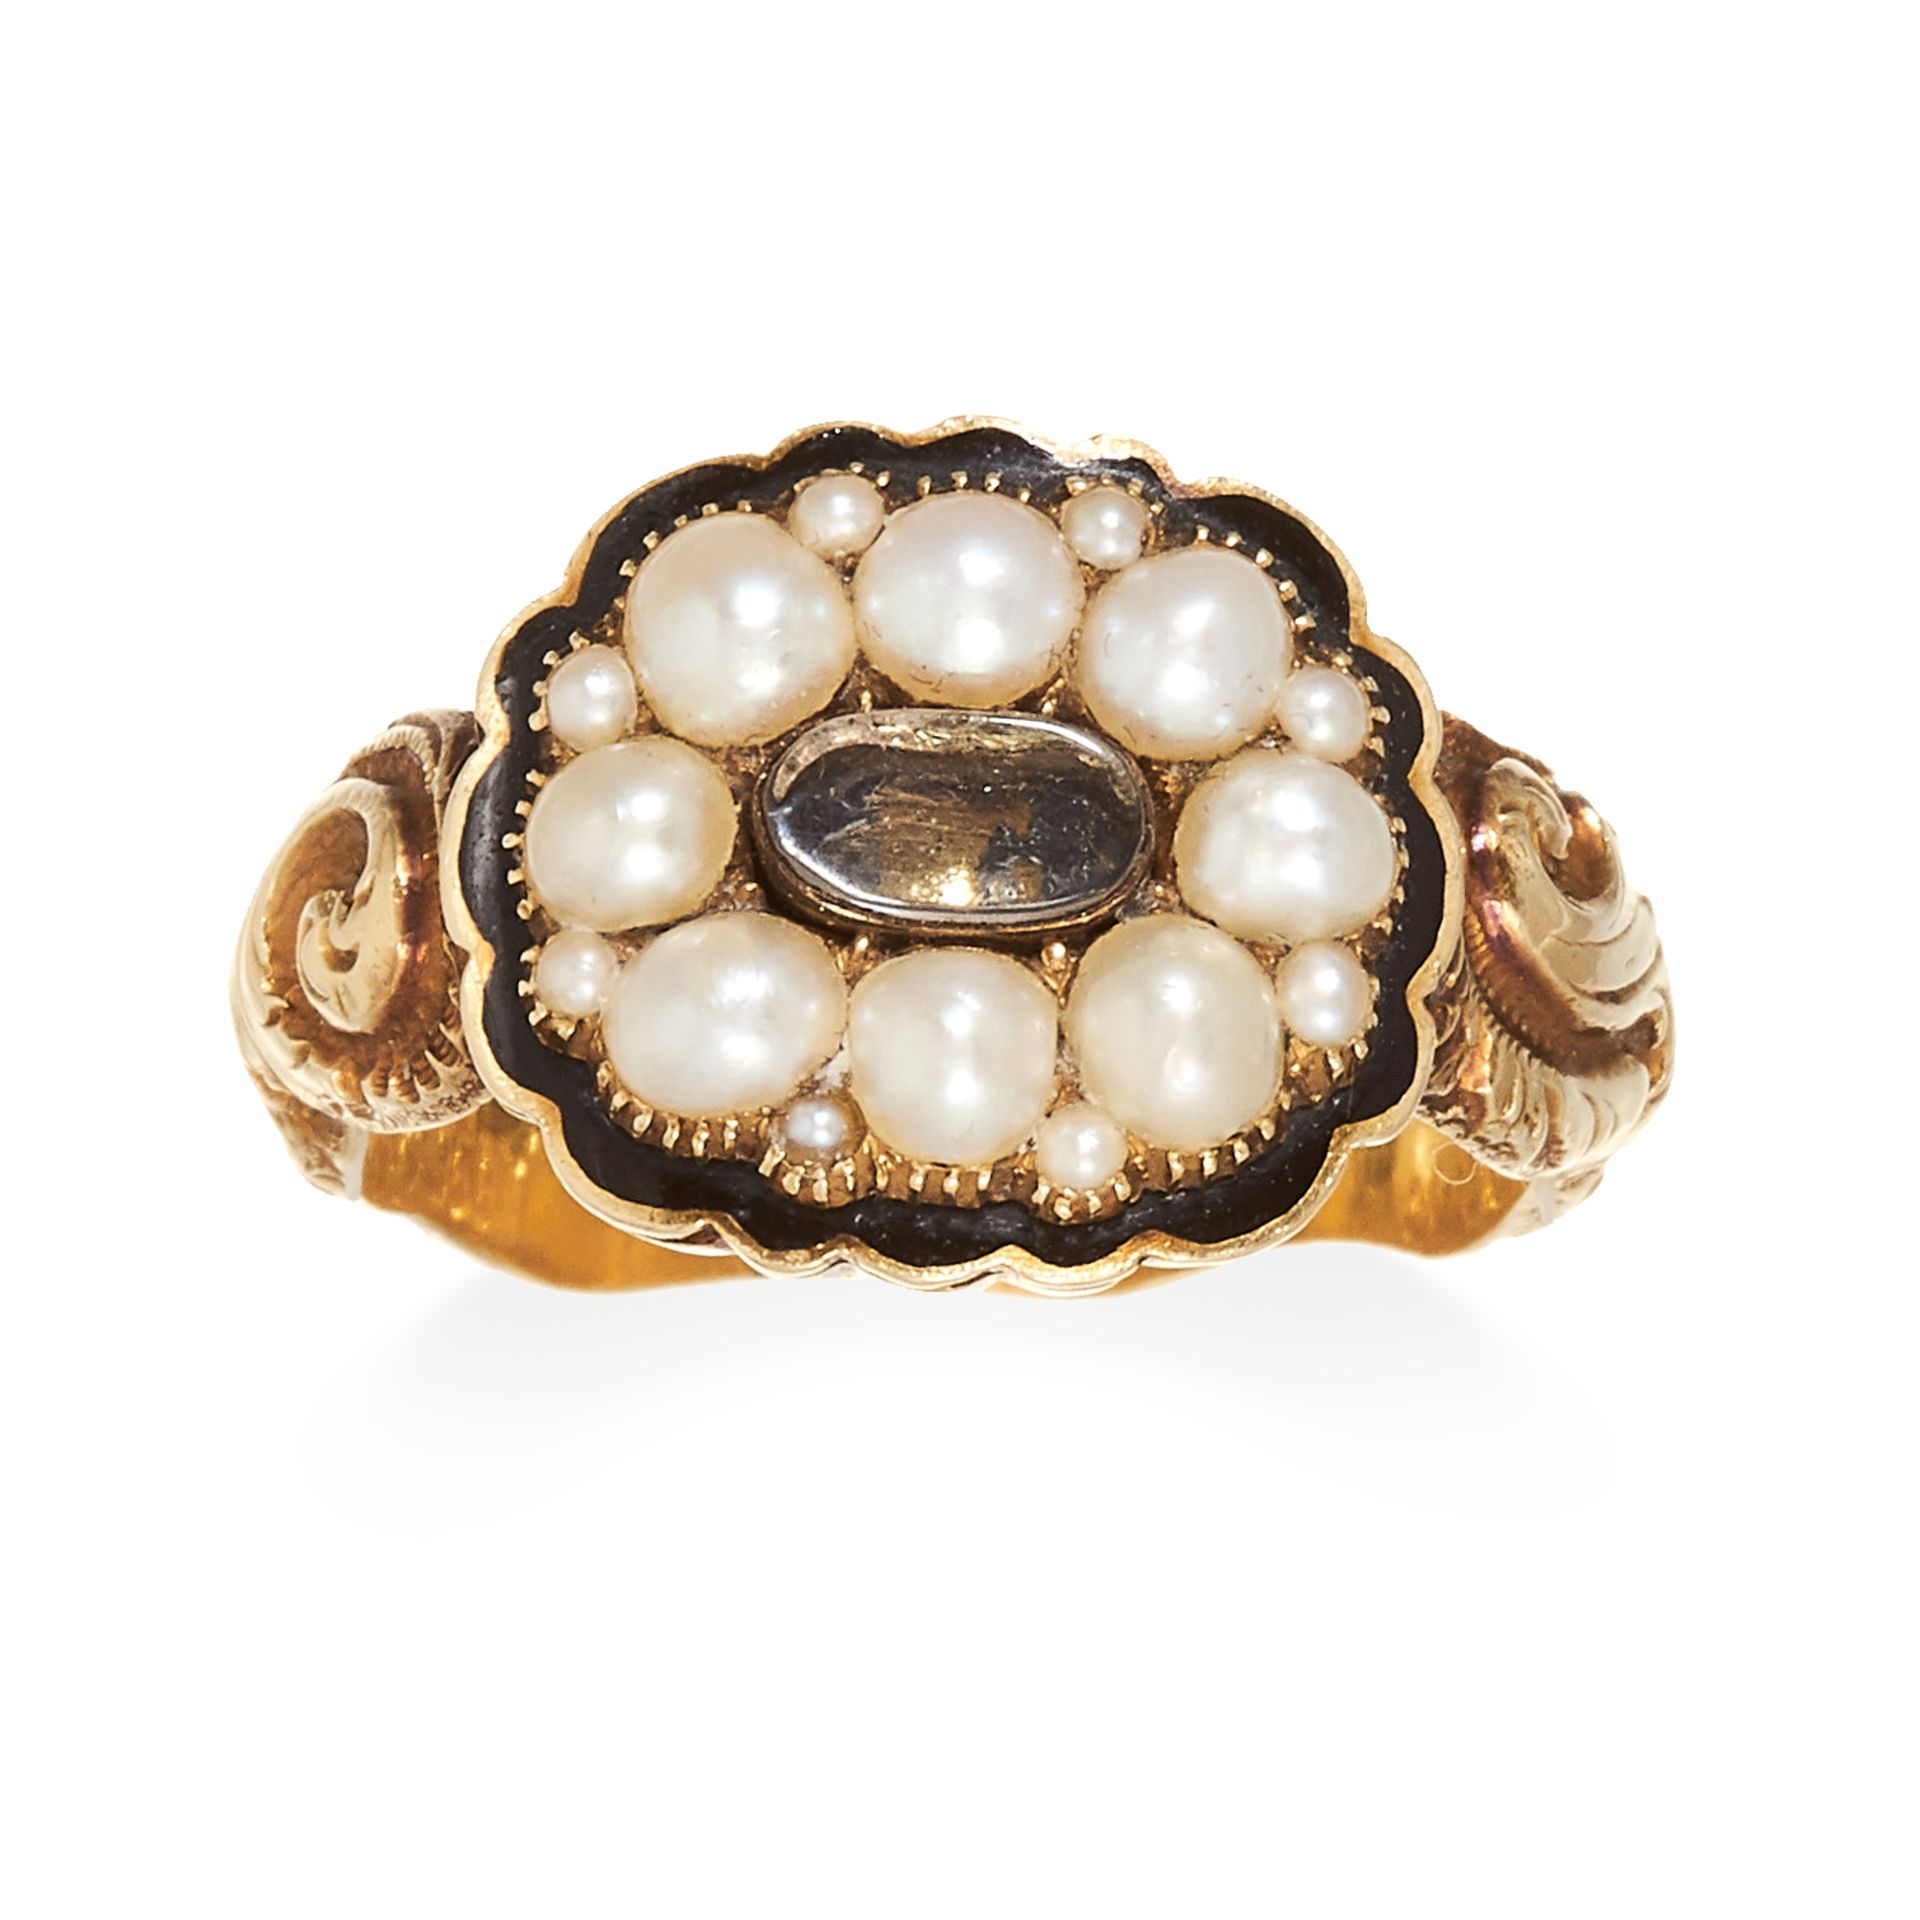 AN ANTIQUE ENAMEL AND PEARL MOURNING RING in 18ct carat yellow gold, the central woven hairwork